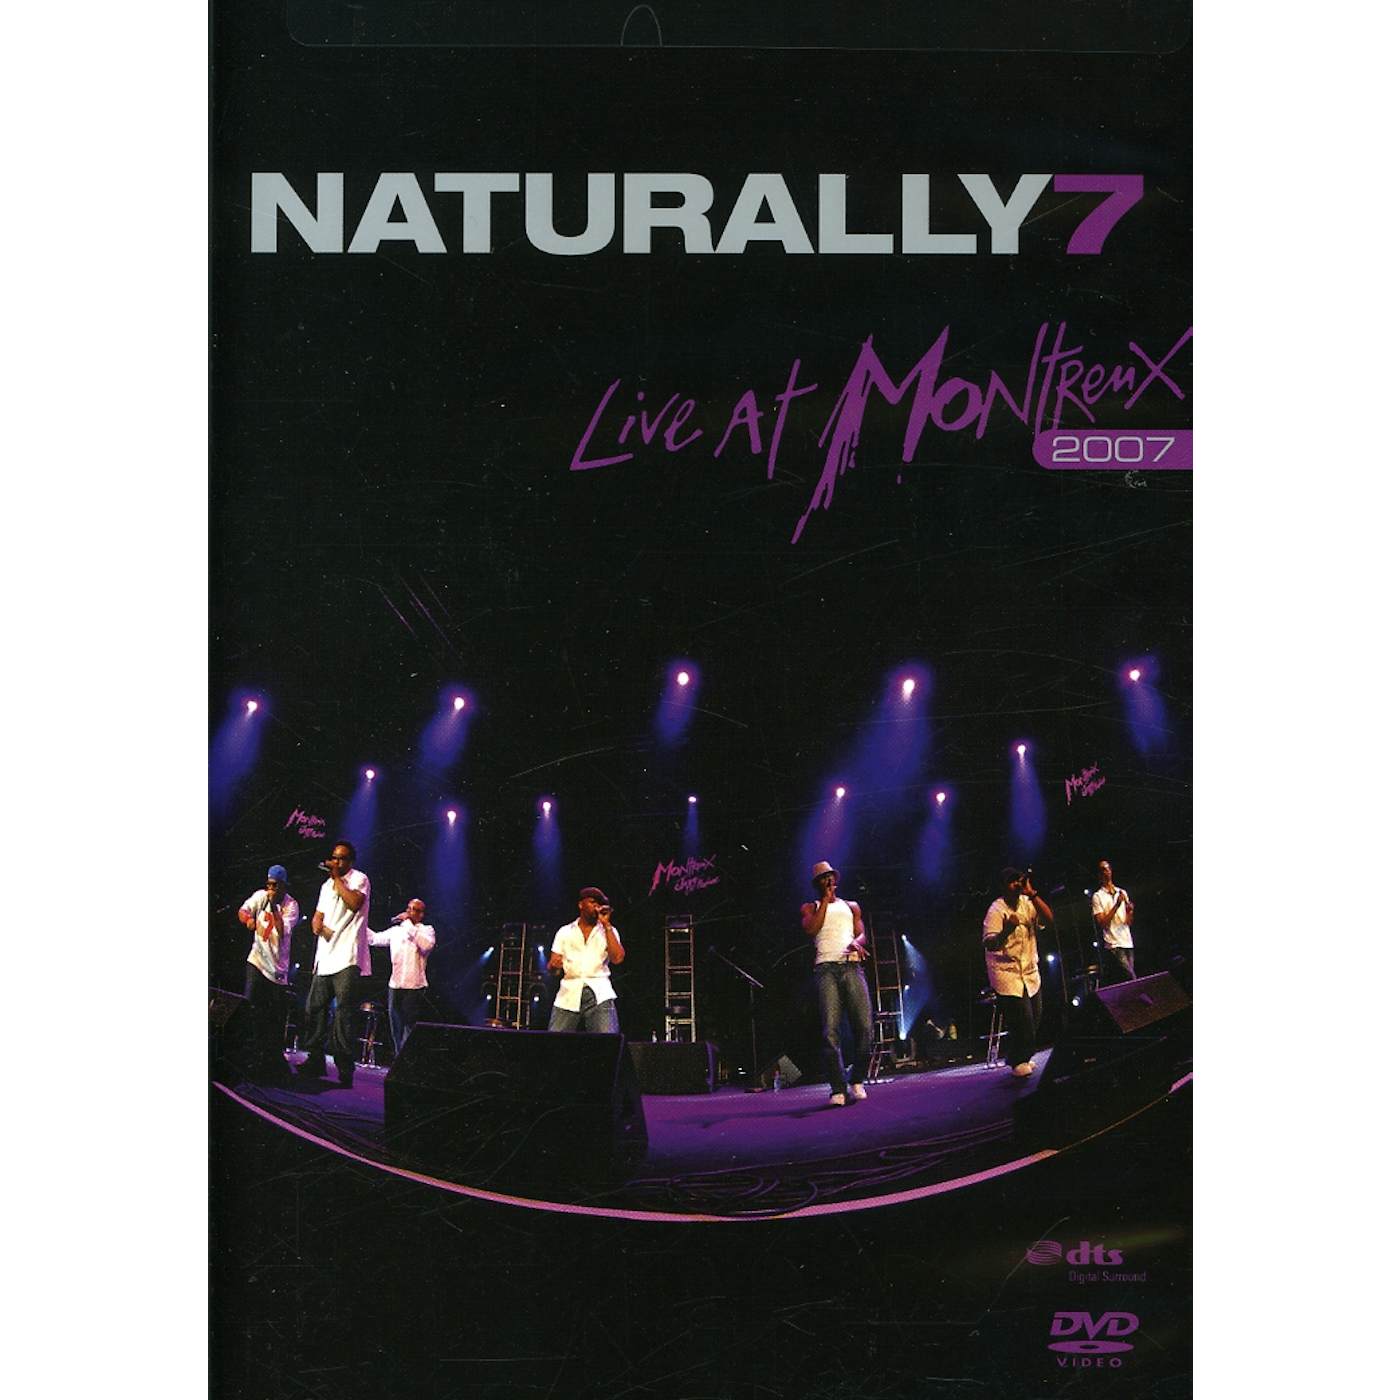 Naturally 7 LIVE AT MONTREUX 2007 DVD